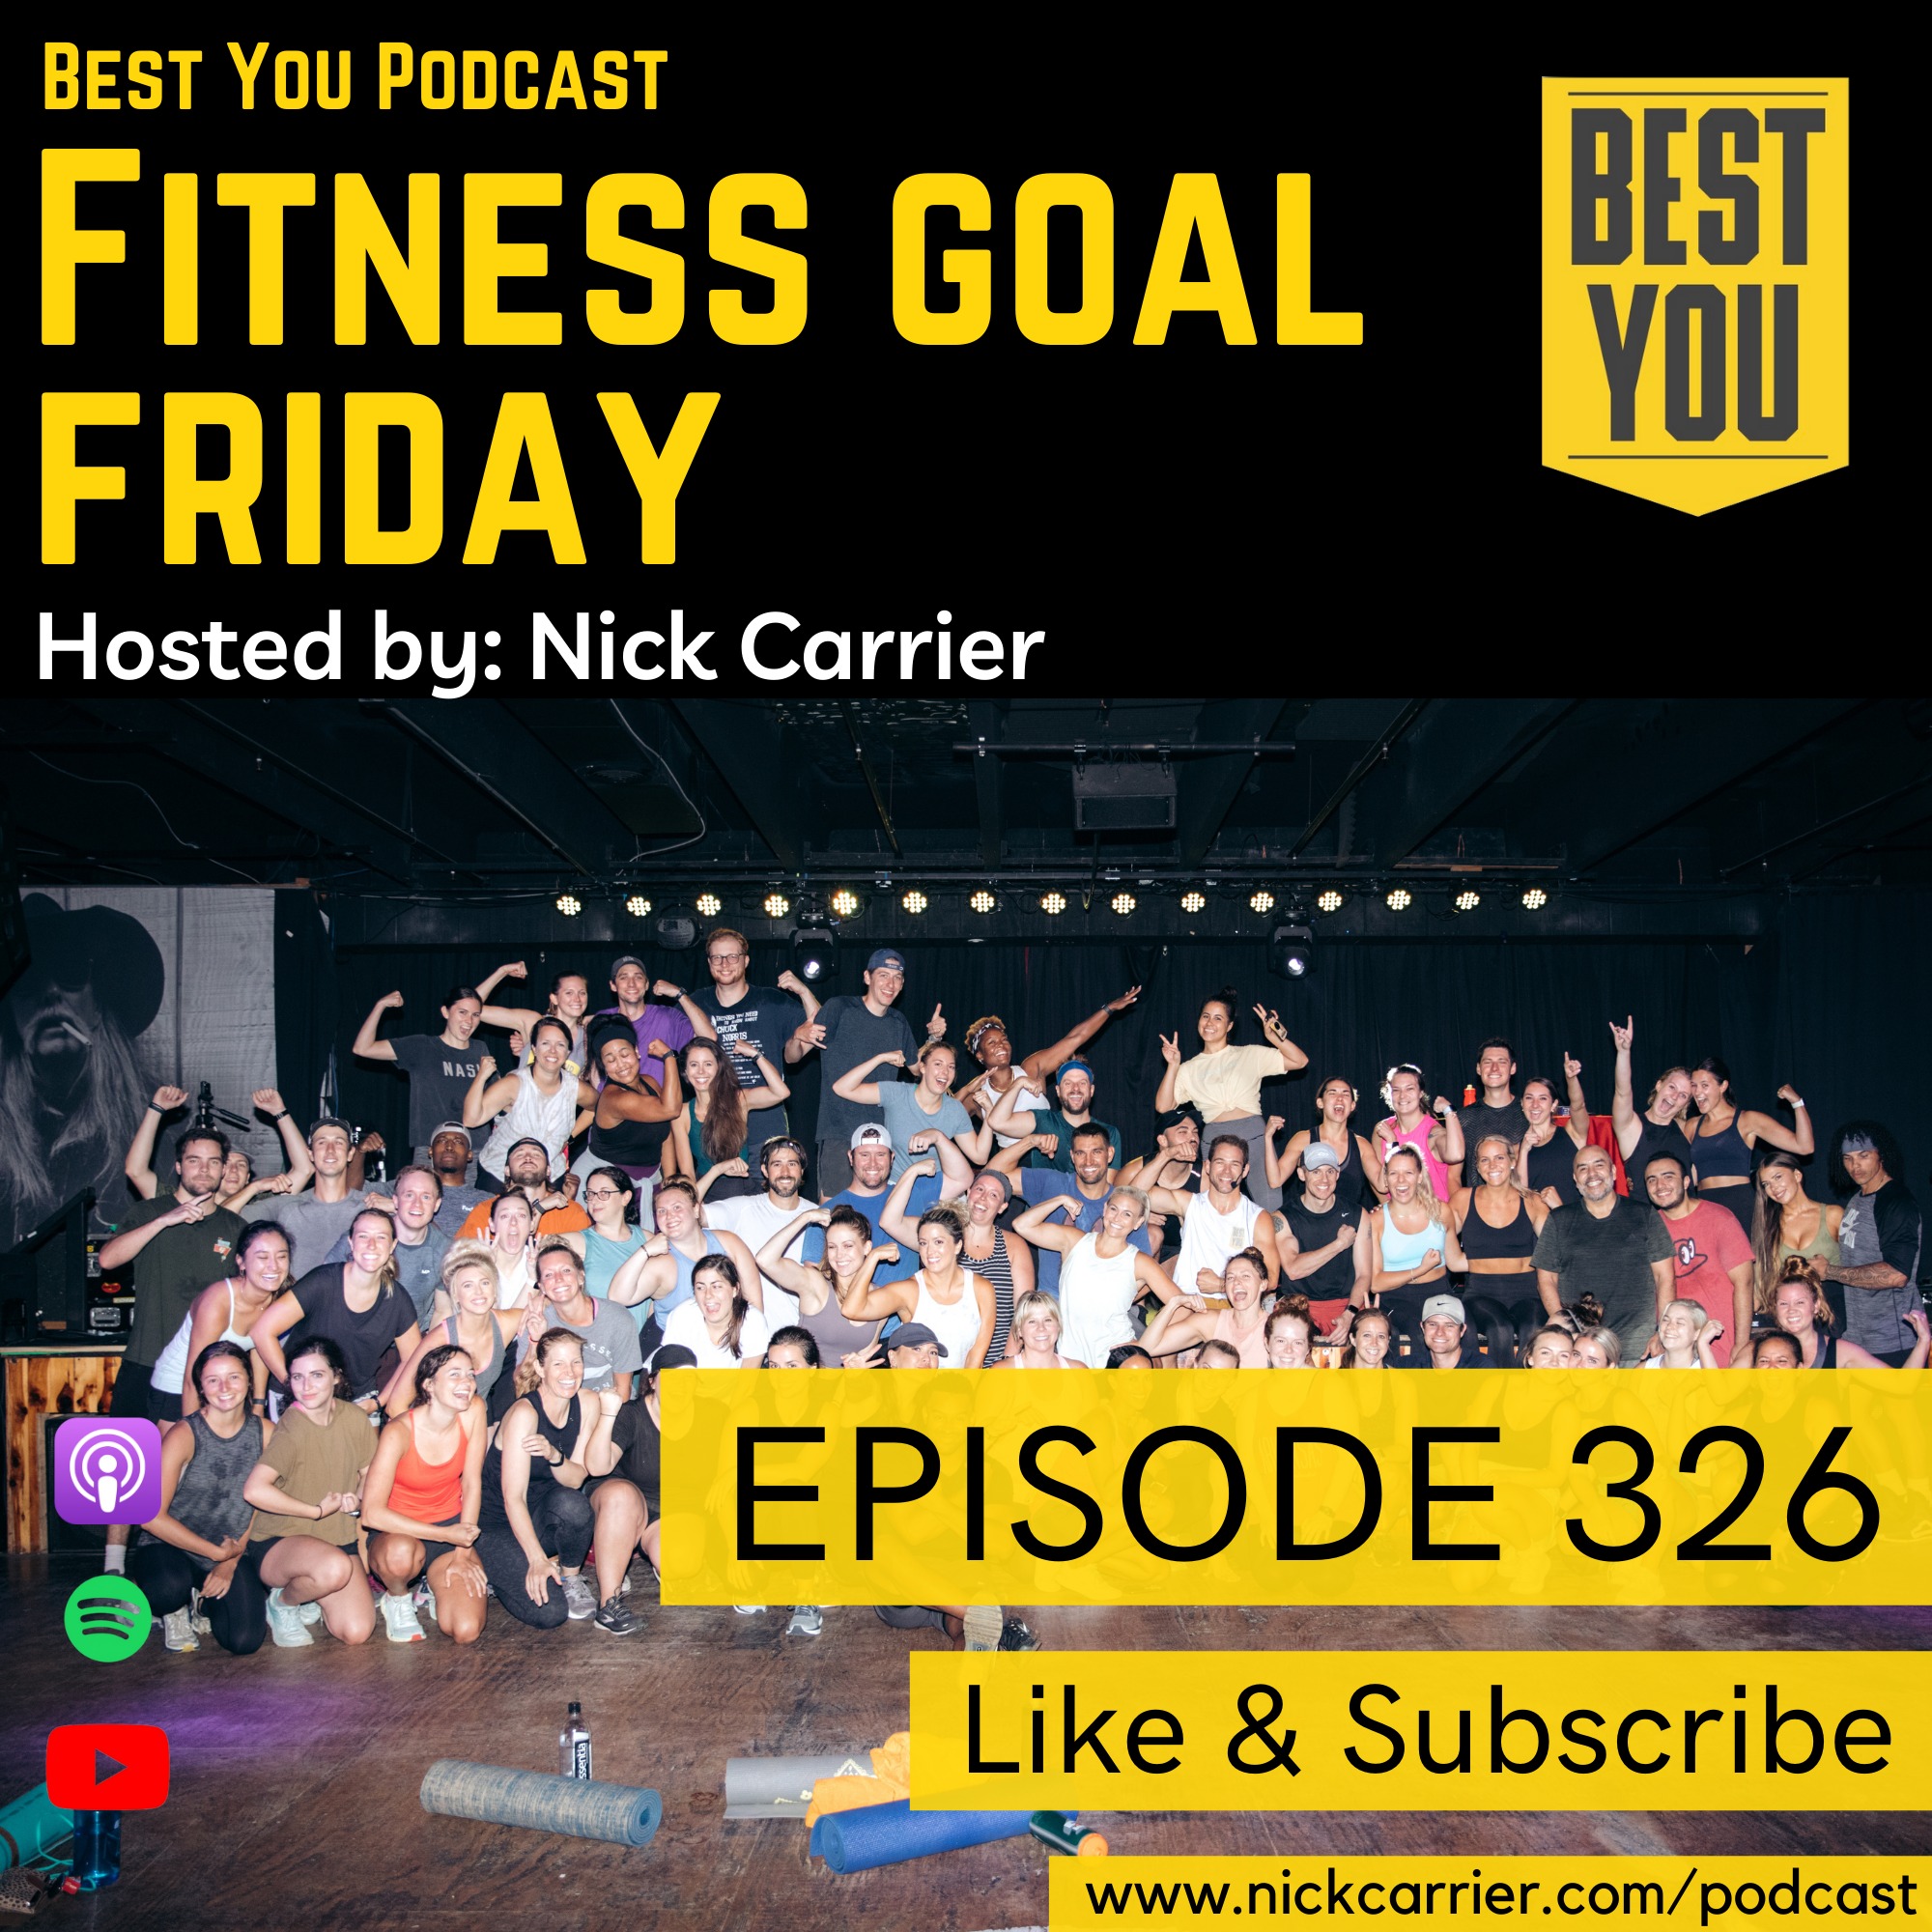 How to Pace Yourself in Workouts (and in Life) - Fitness Goal Friday